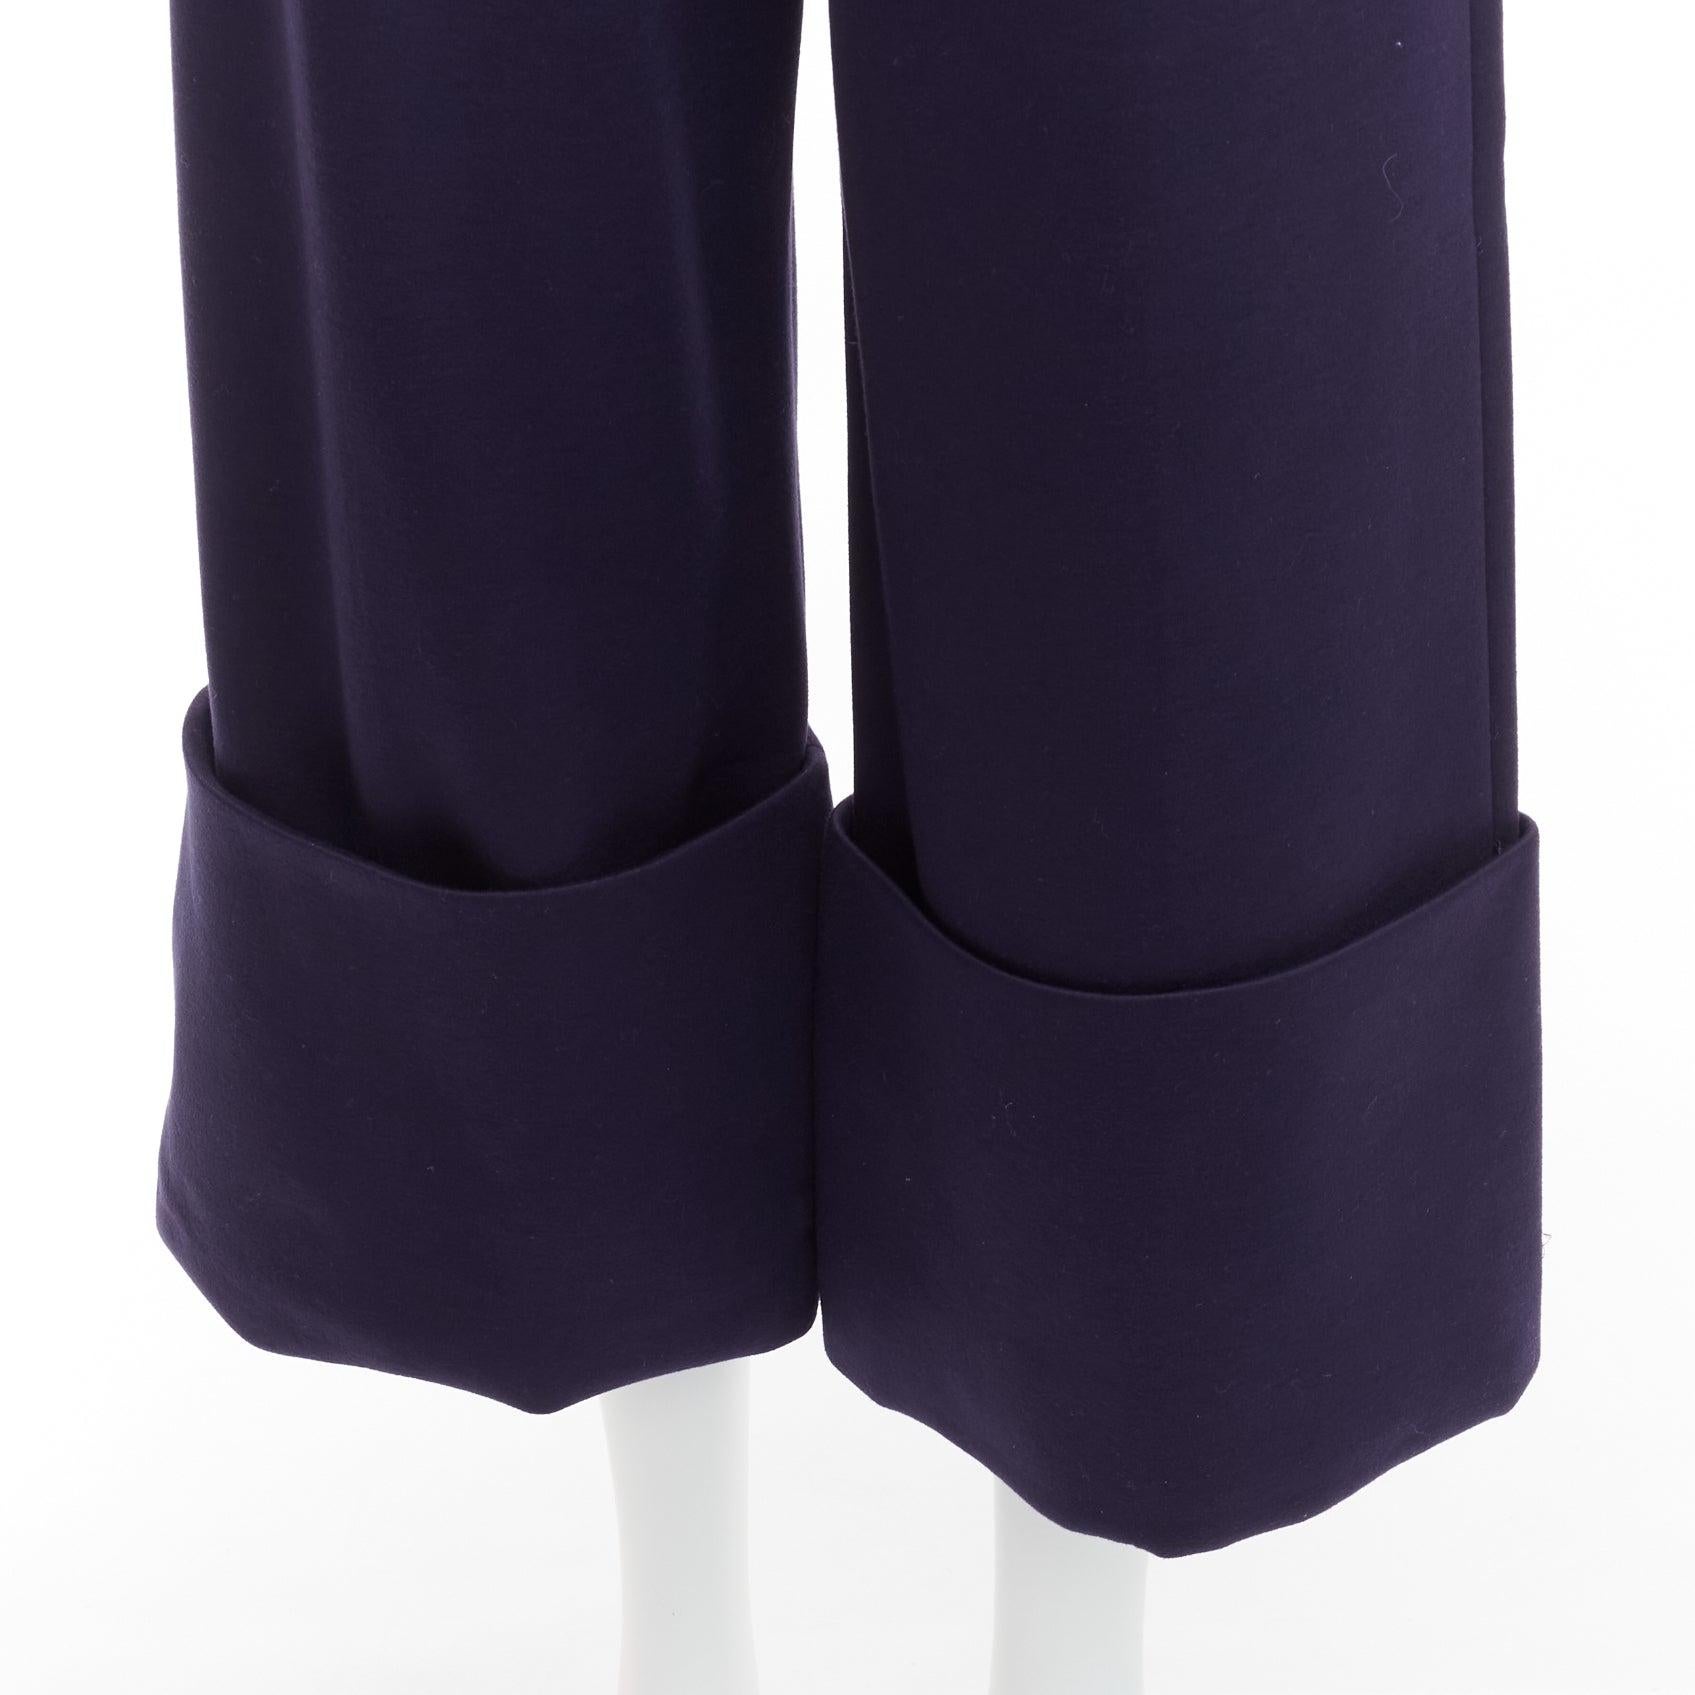 DELPOZO navy viscose sailor style rolled cuffs cropped wide leg pants FR36 S
Reference: LNKO/A02284
Brand: Delpozo
Material: Viscose
Color: Navy
Pattern: Solid
Closure: Zip Fly
Extra Details: Pocket at right at back.
Made in: